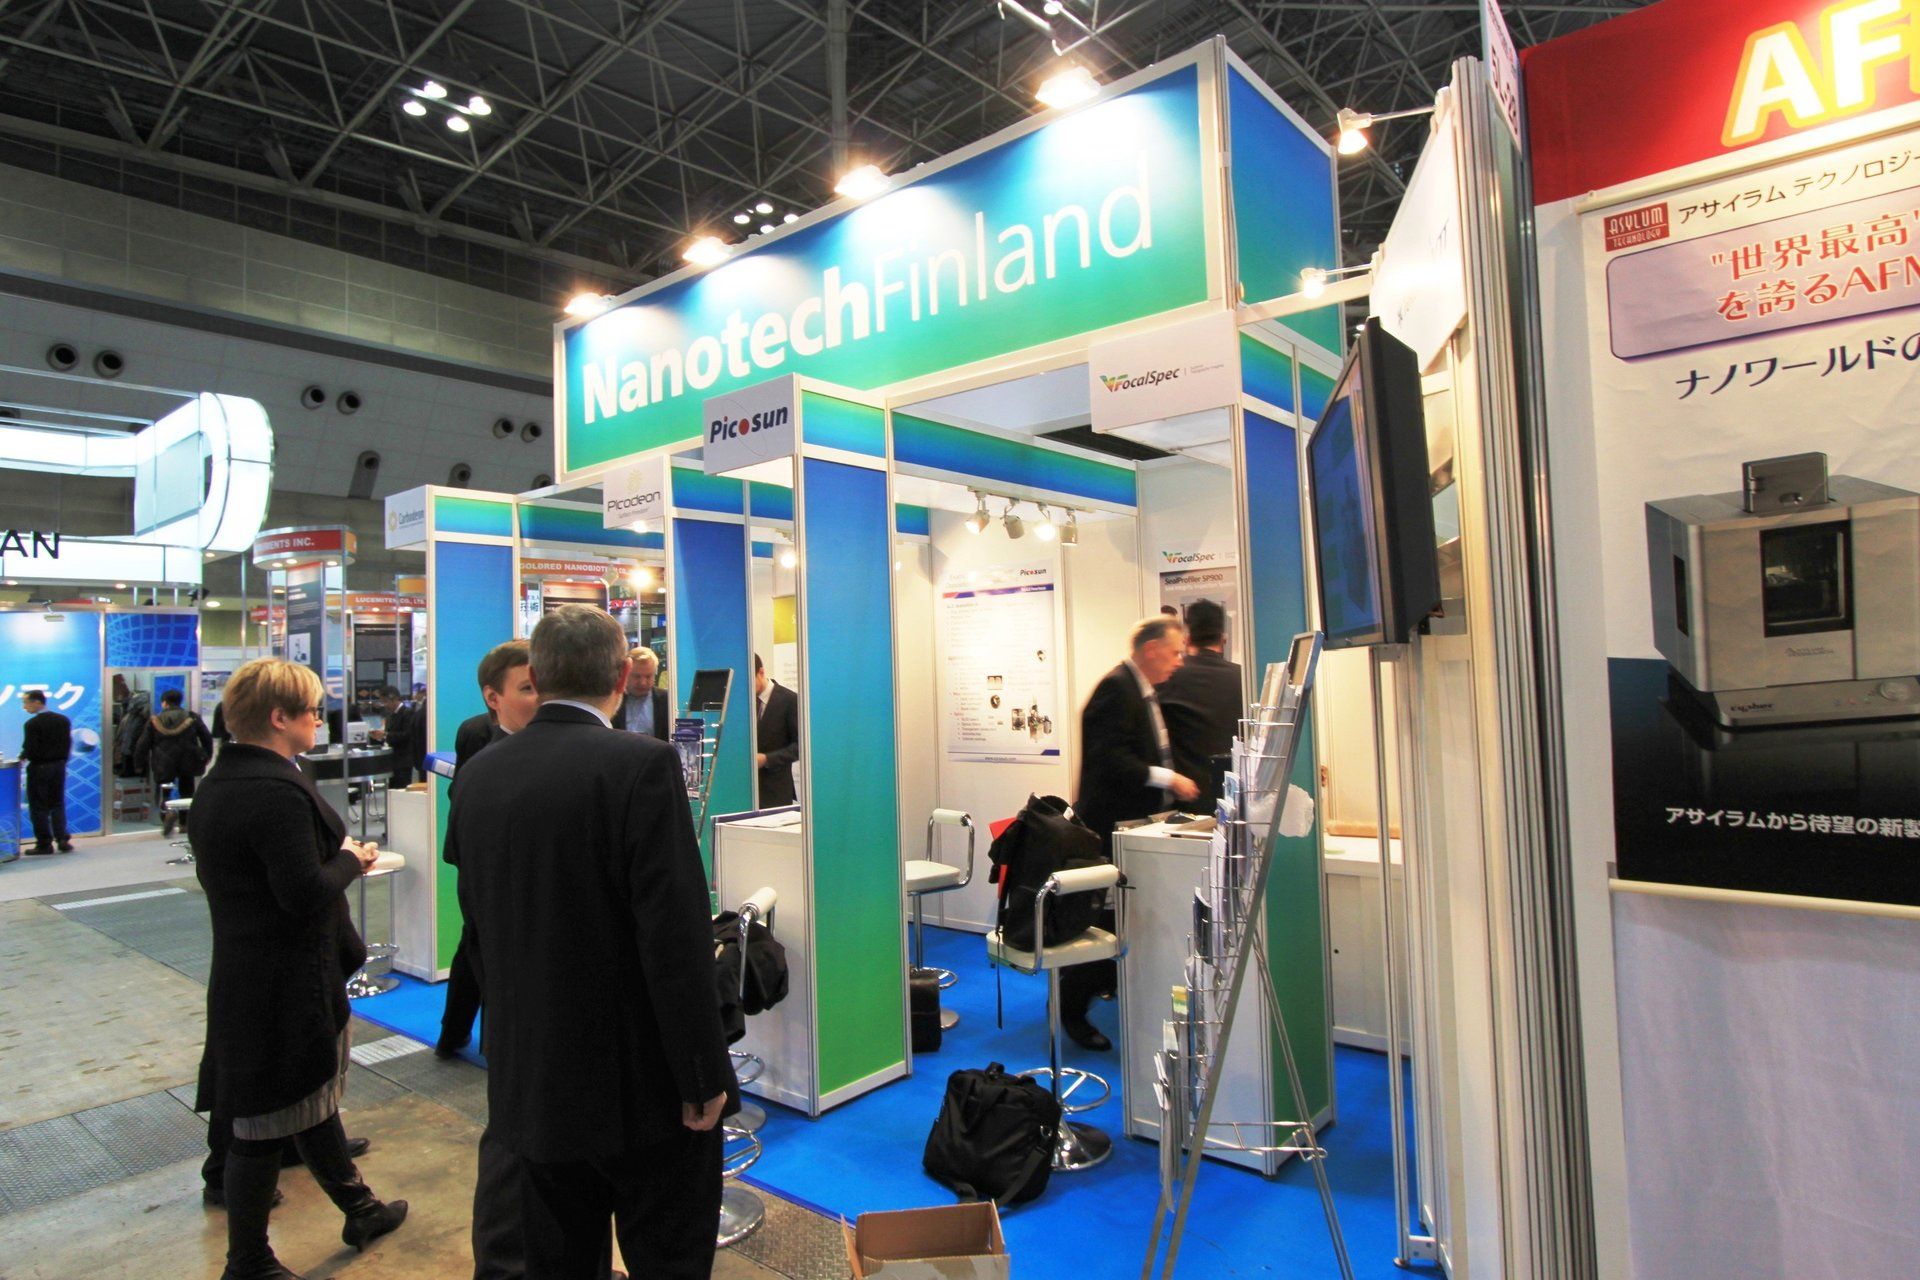 Finland Pavilion @ Nano Tech 2013. Booth designed and built by Essential Global Fairs.